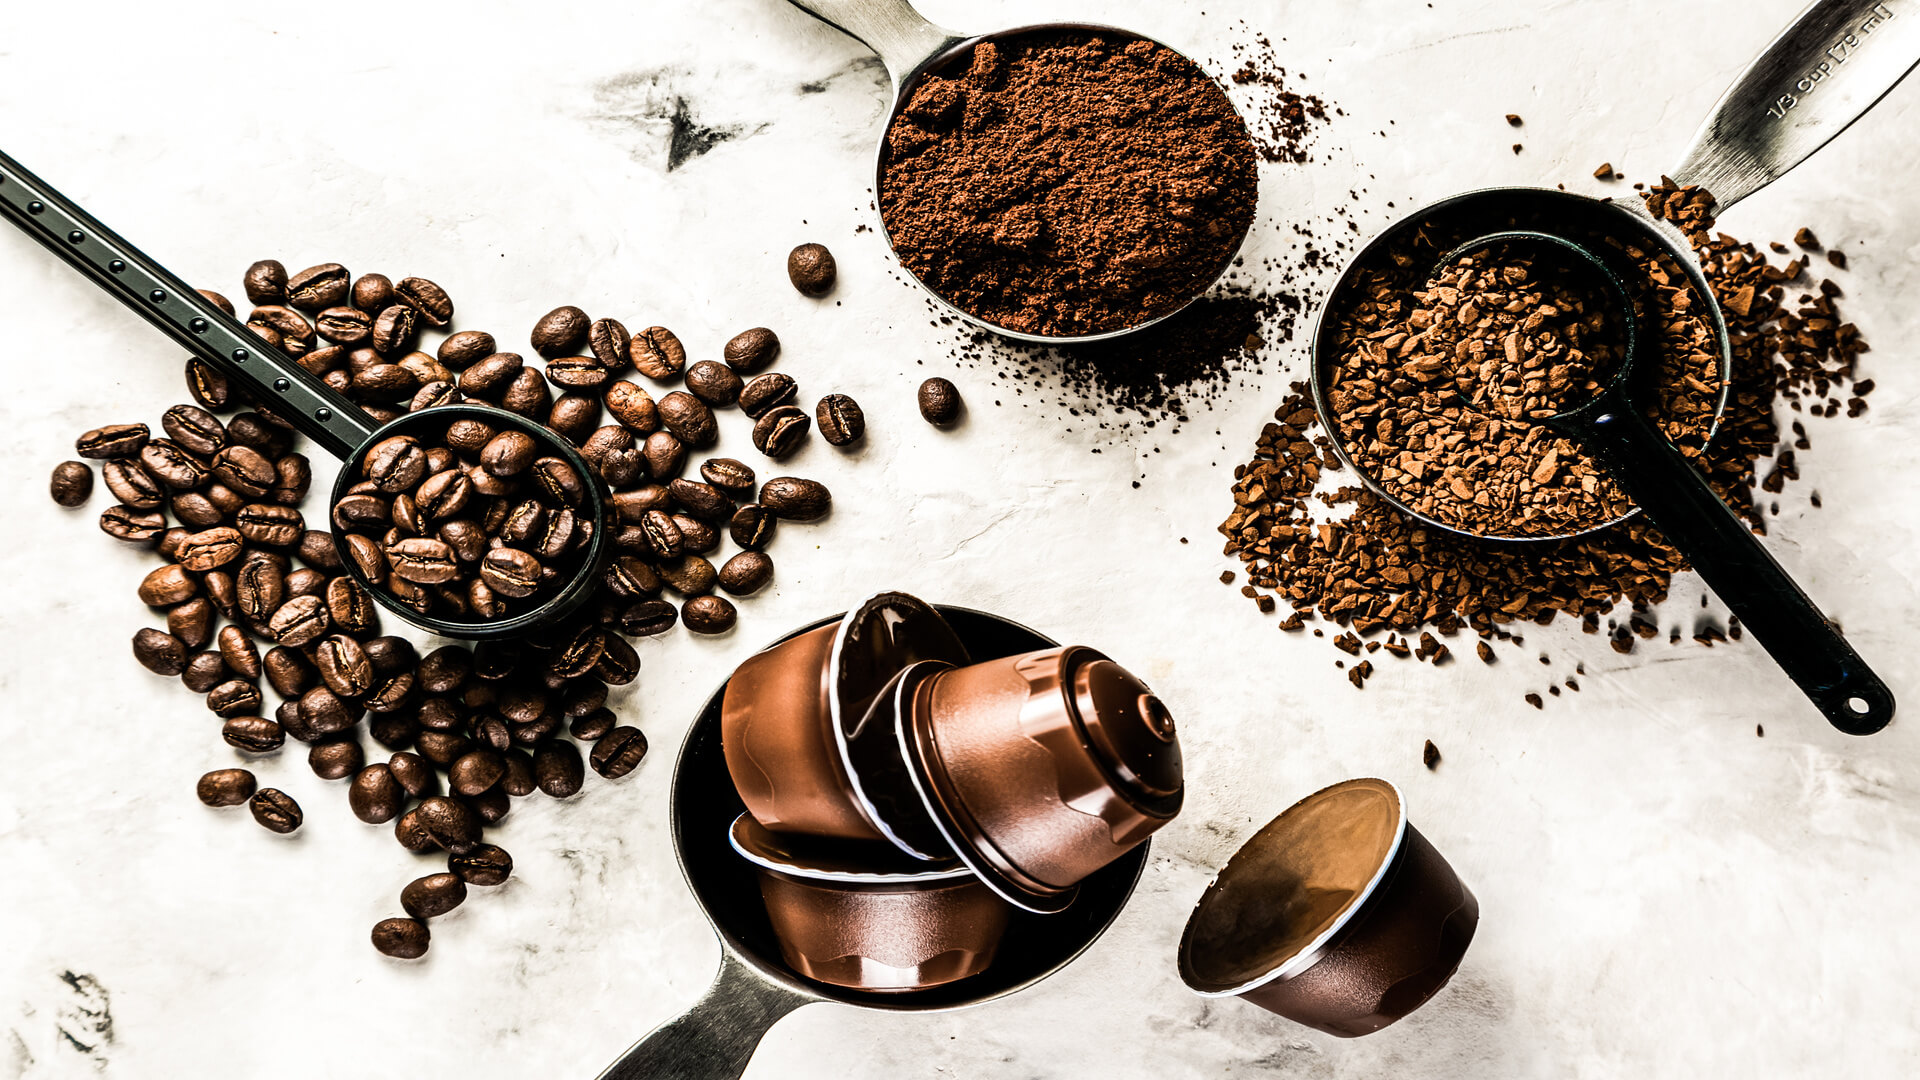 Your guide to healthier caffeine consumption